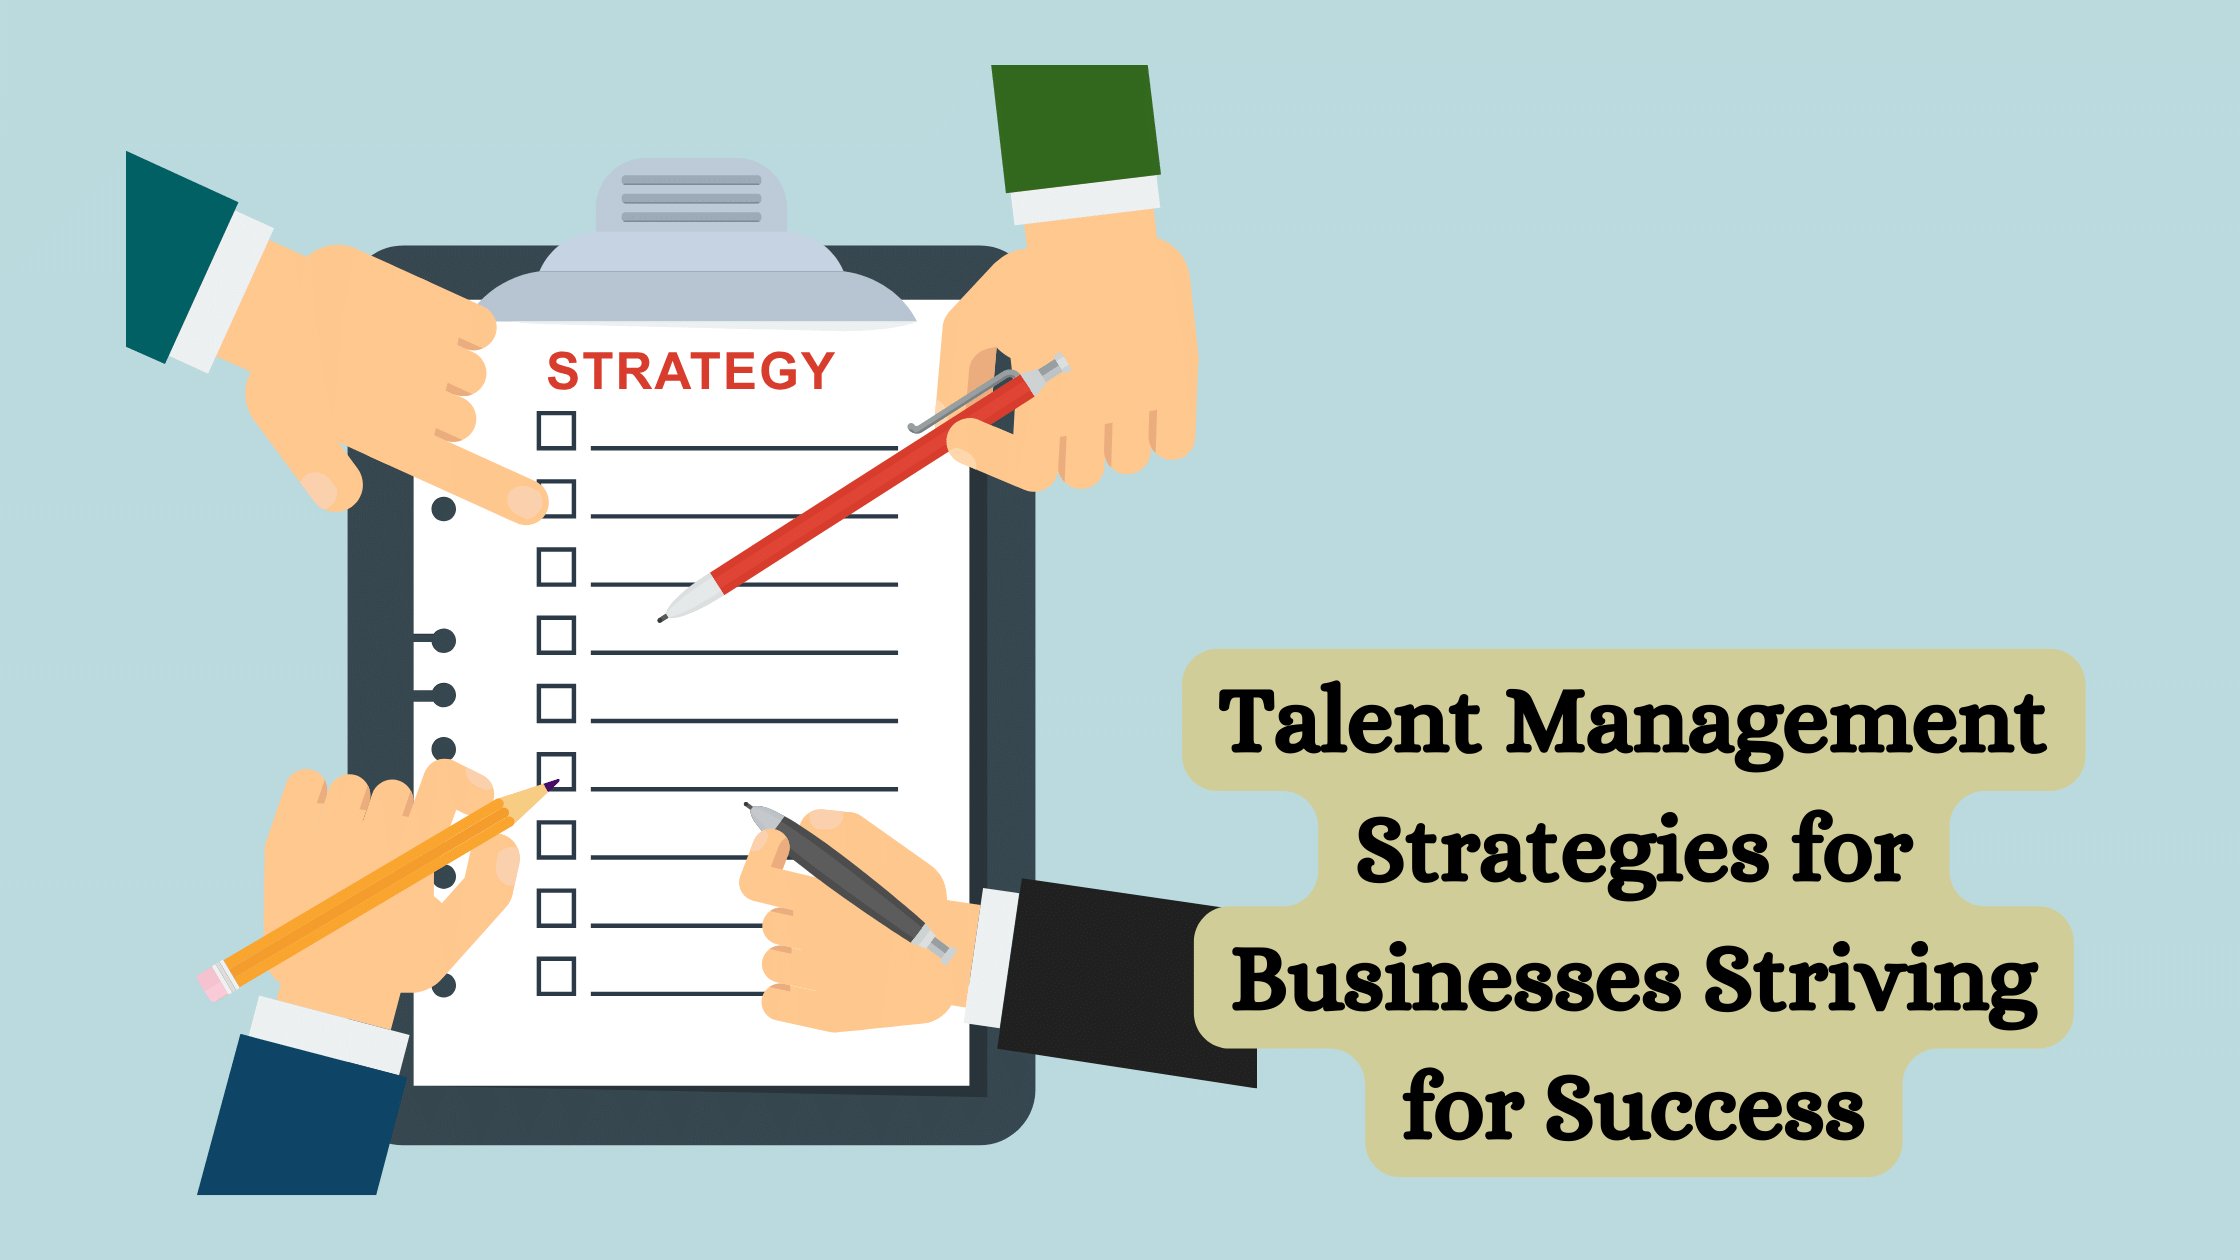 Management Strategies for Businesses Striving for Success